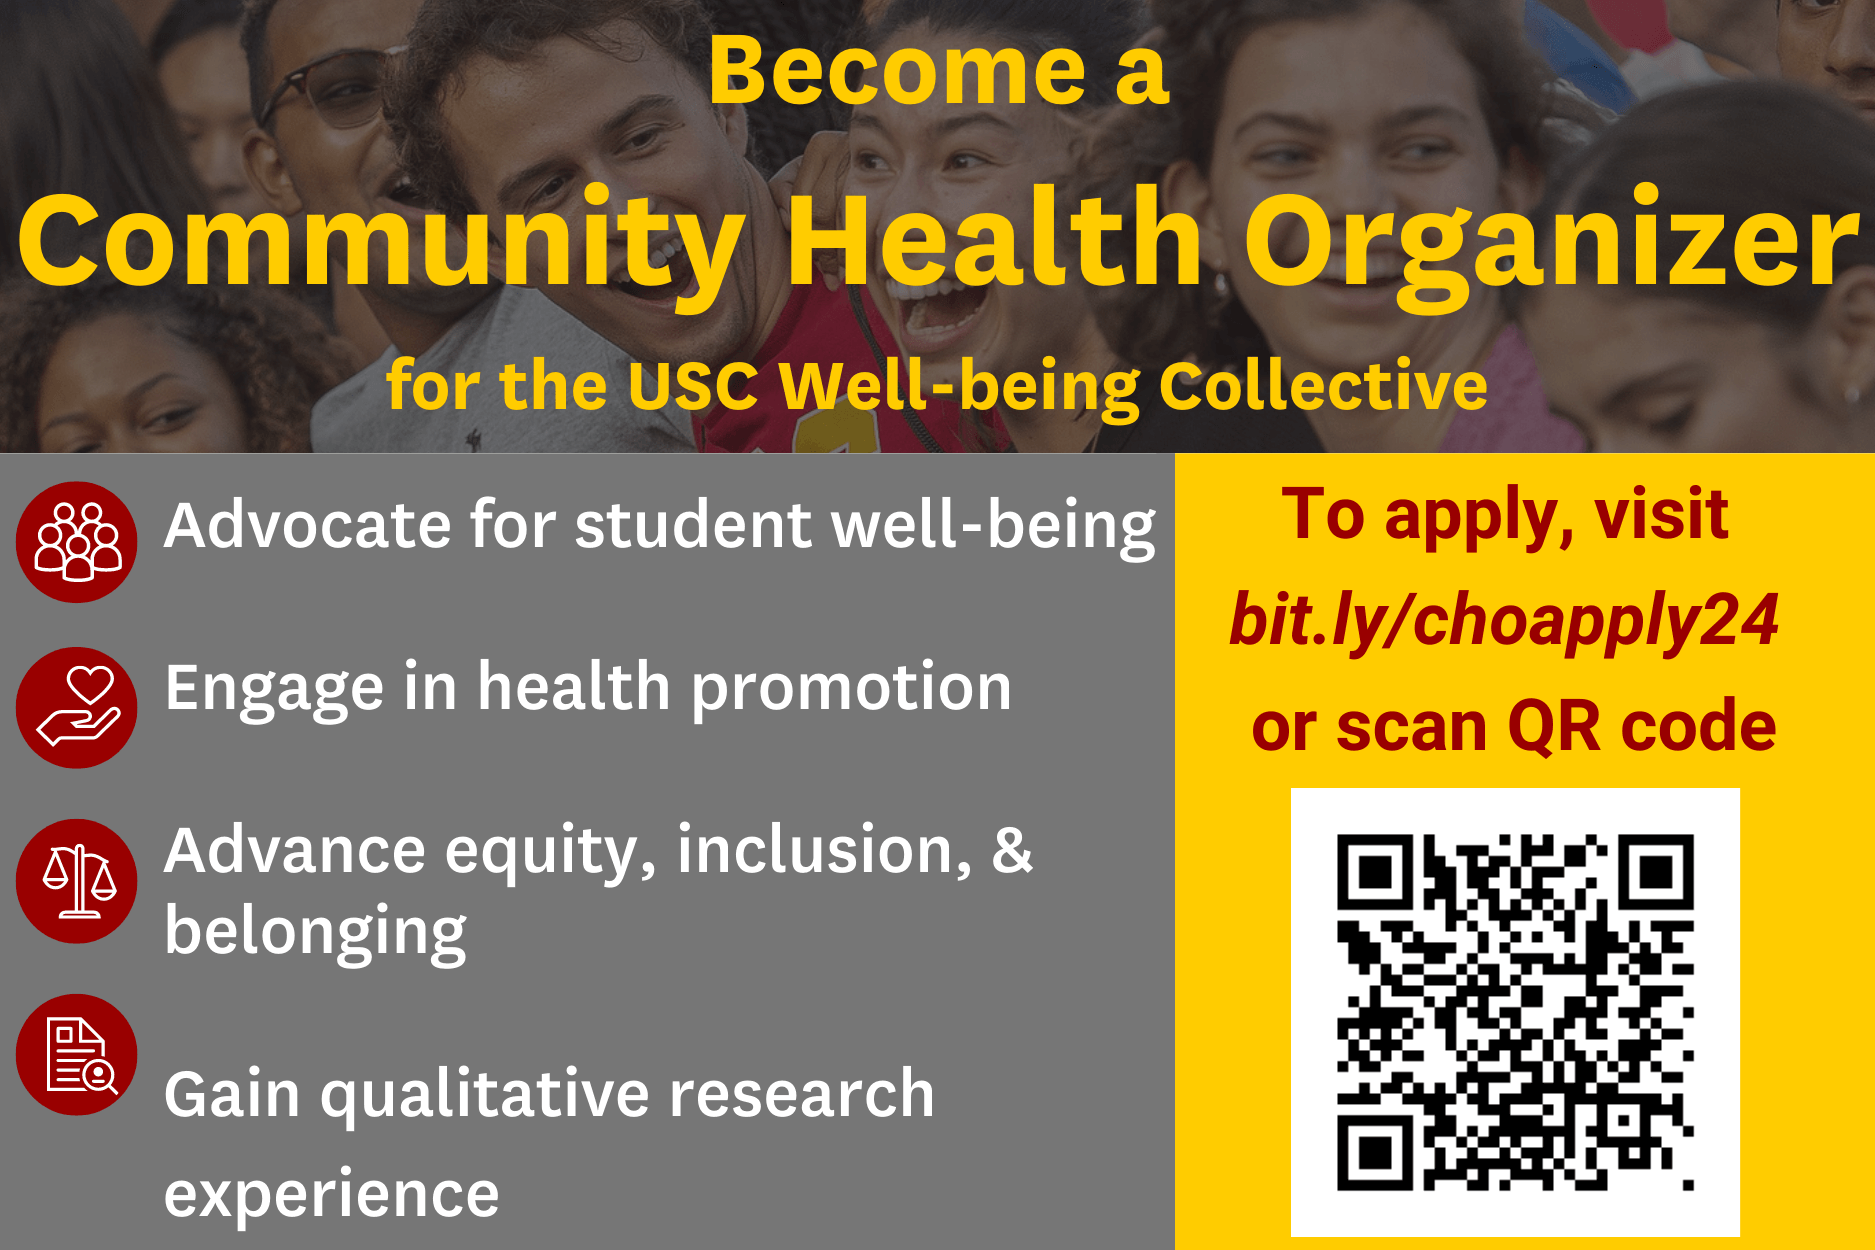 Featured image for “Become a Community Health Organizer for the USC Well-being Collective”